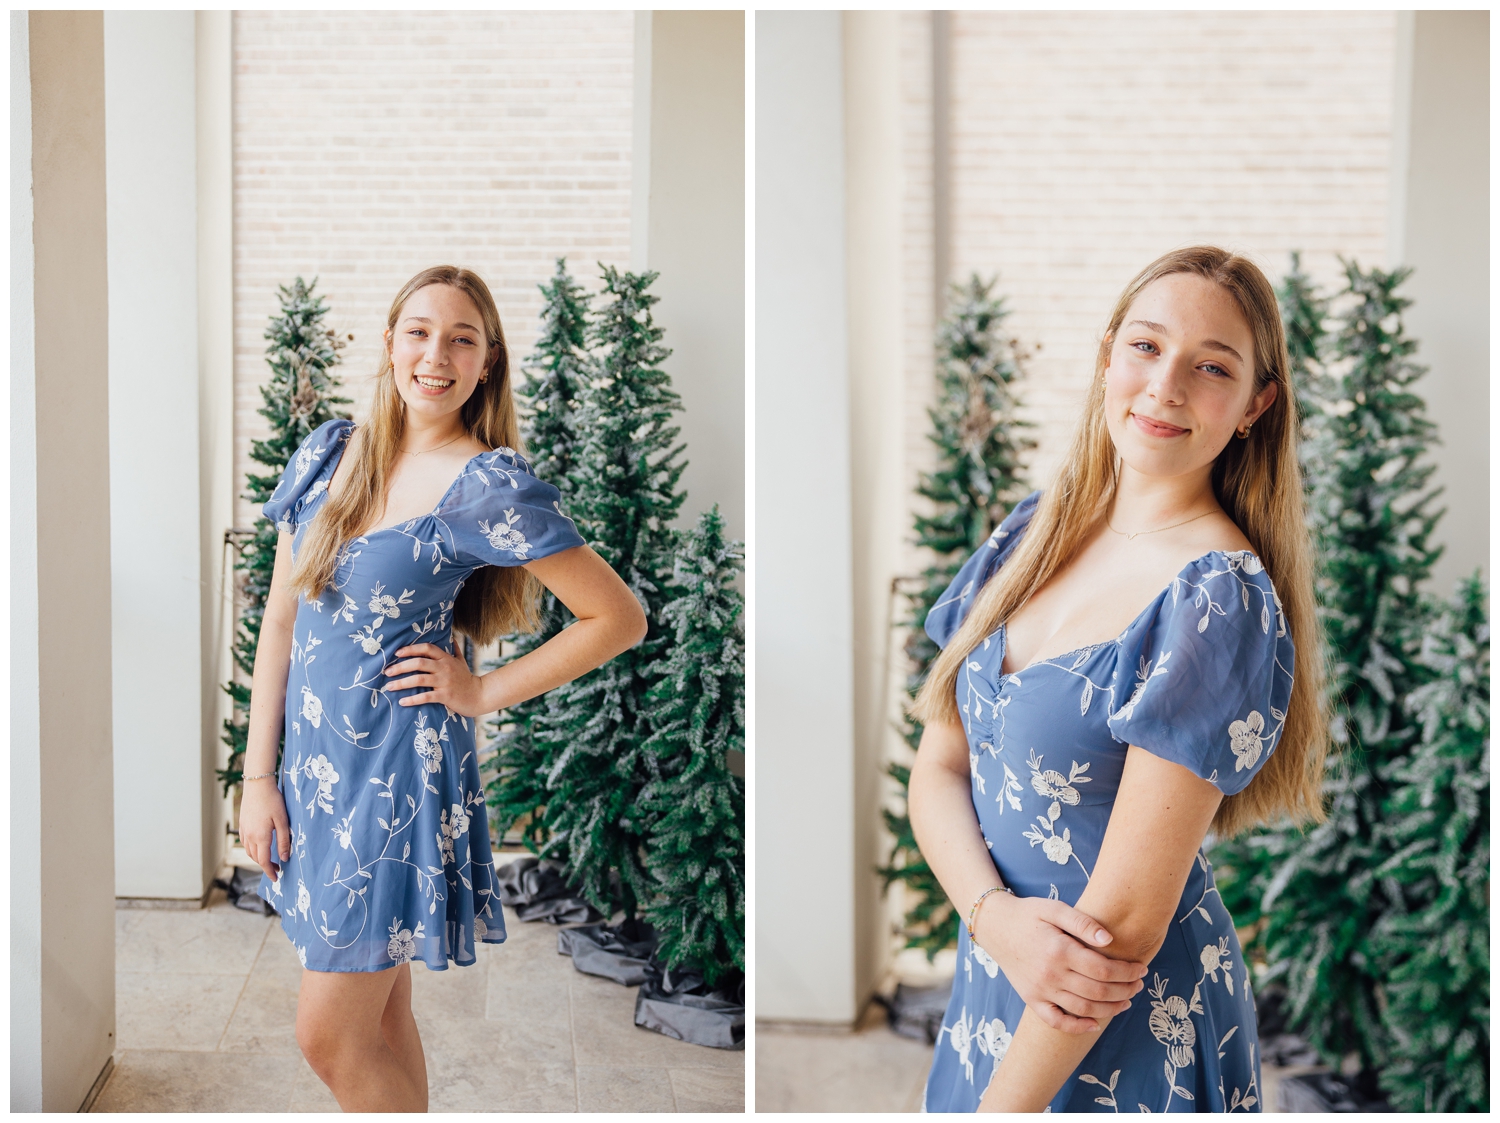 Senior girl in blue floral dress standing outdoors in front of Christmas trees for senior reps Christmas photoshoot